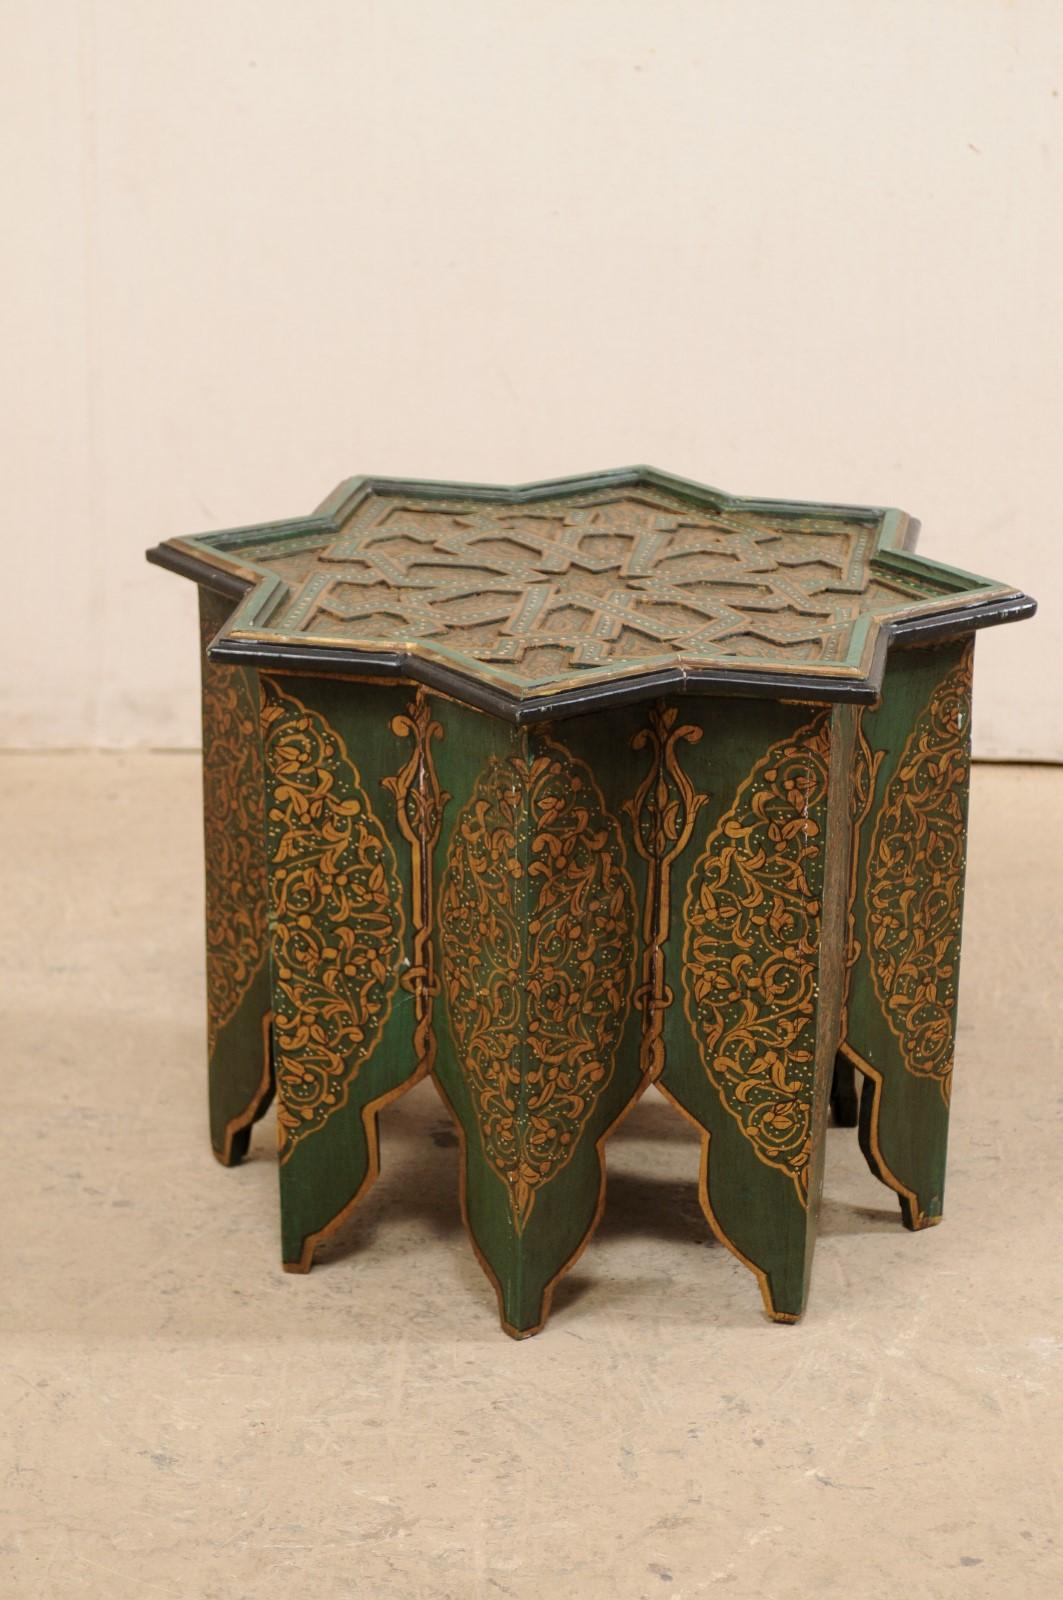 20th Century Moroccan Morrish Star Shaped Tea or Side Table, in Green, Black and Gold